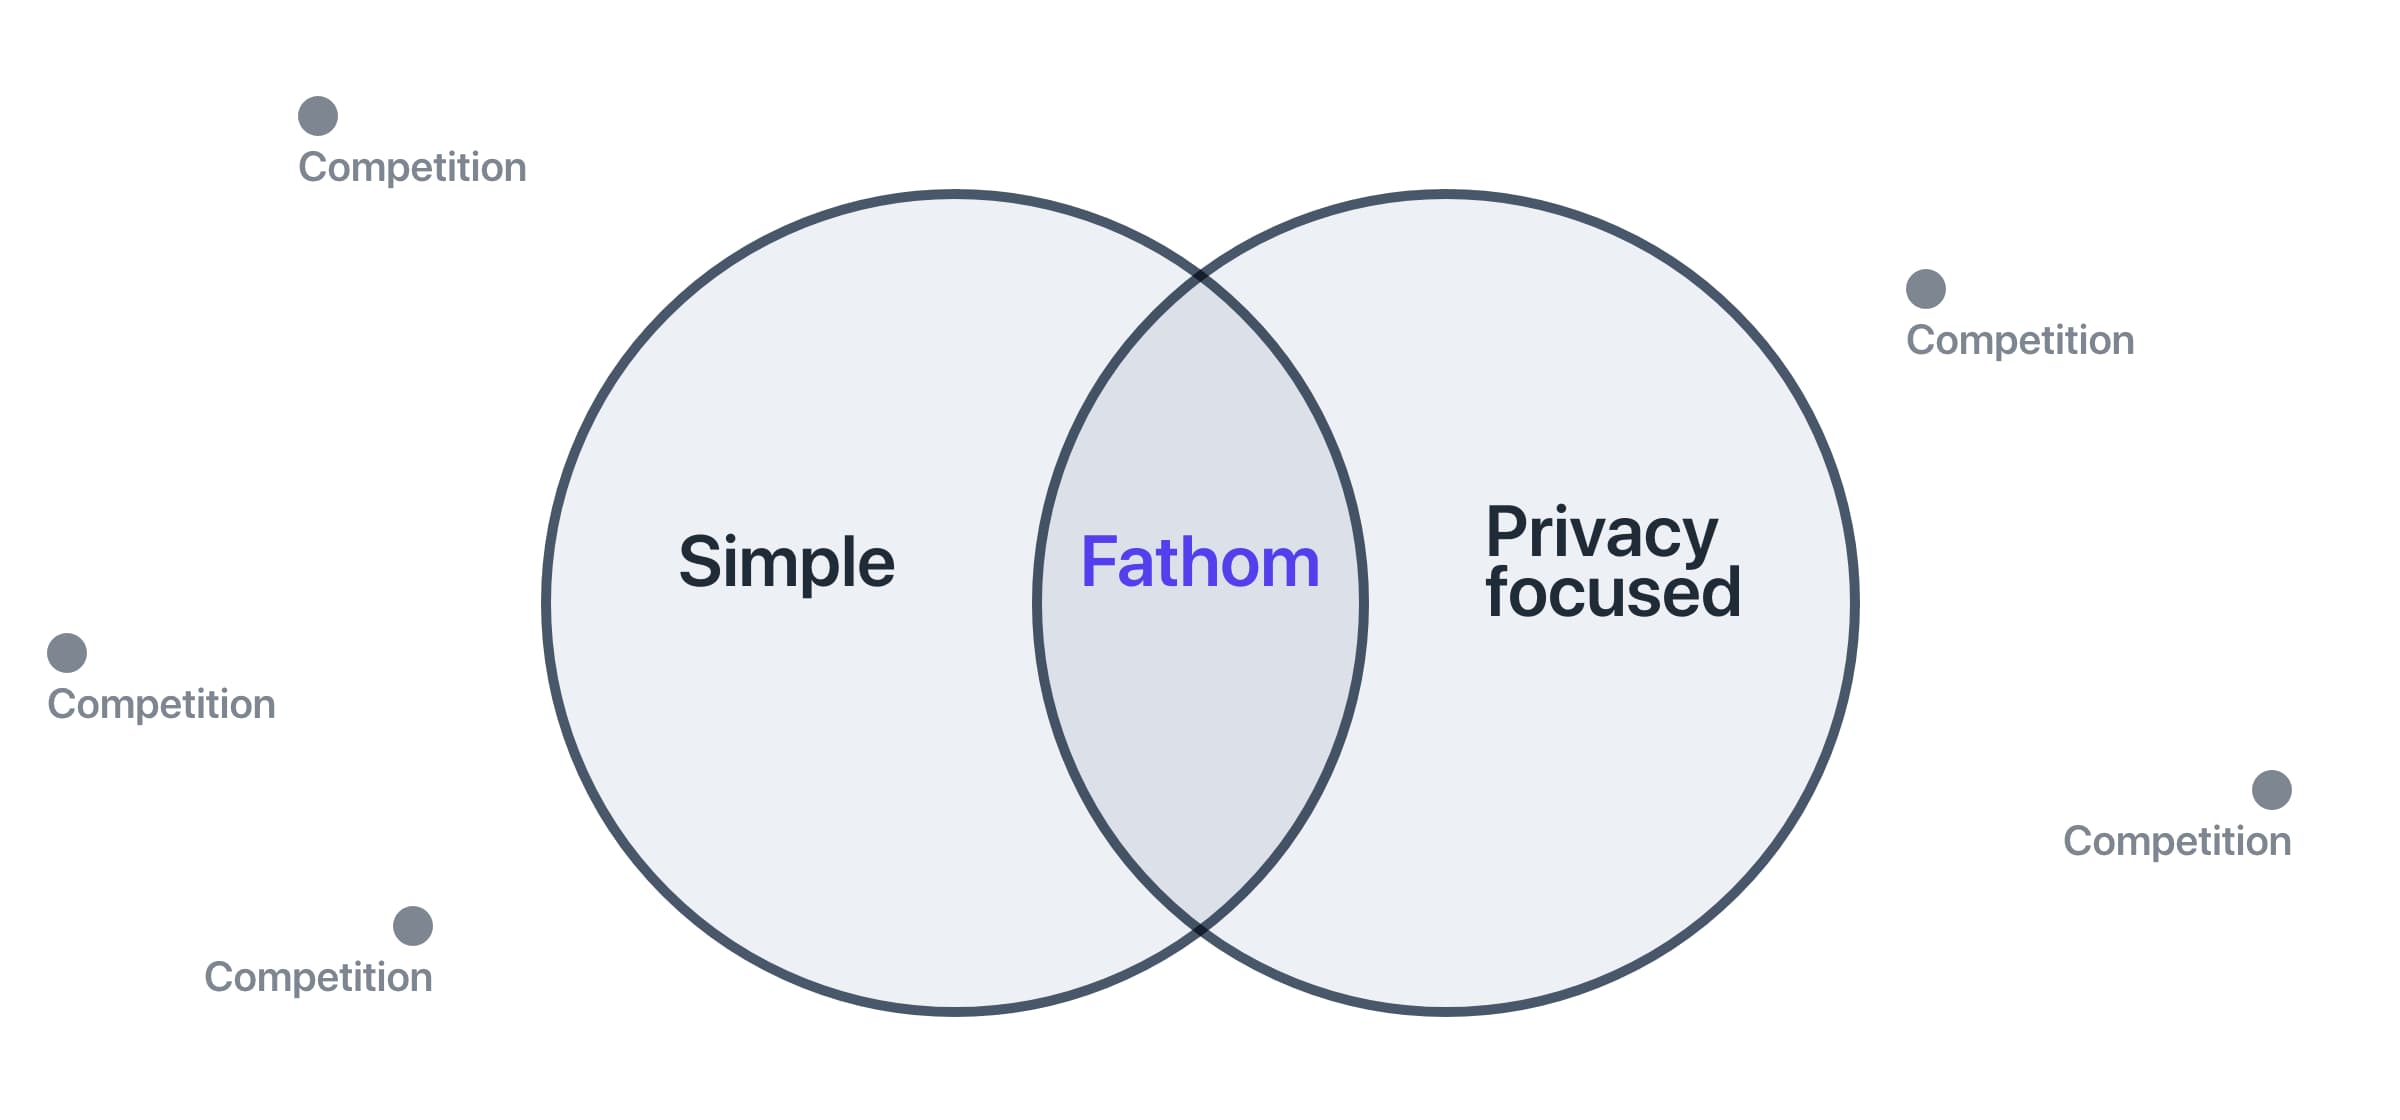 Fathom and our competitors are both simple and privacy focused